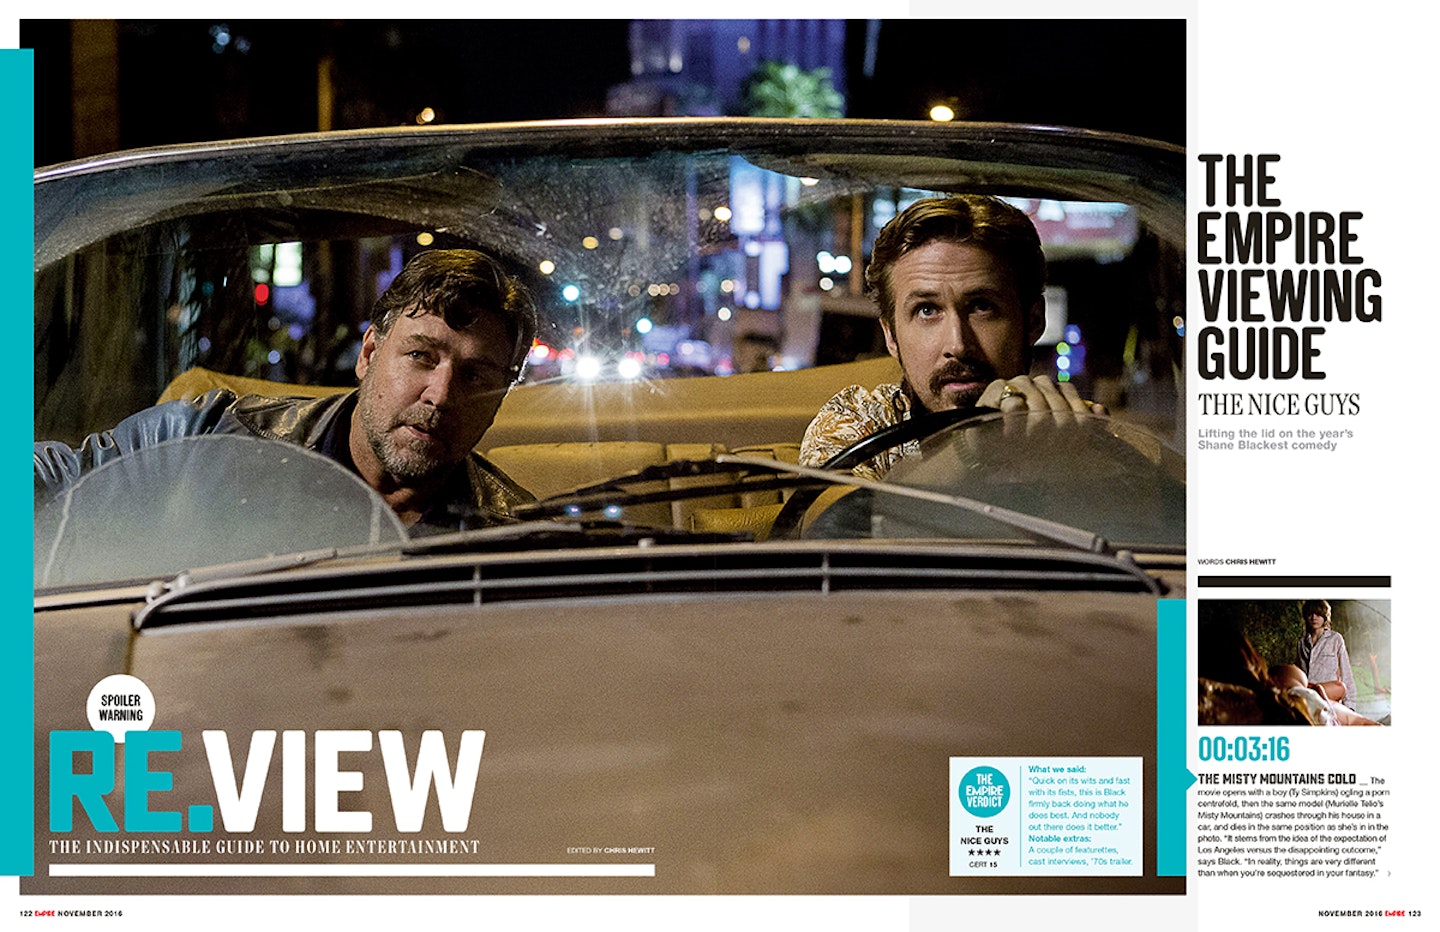 The Nice Guys viewing guide